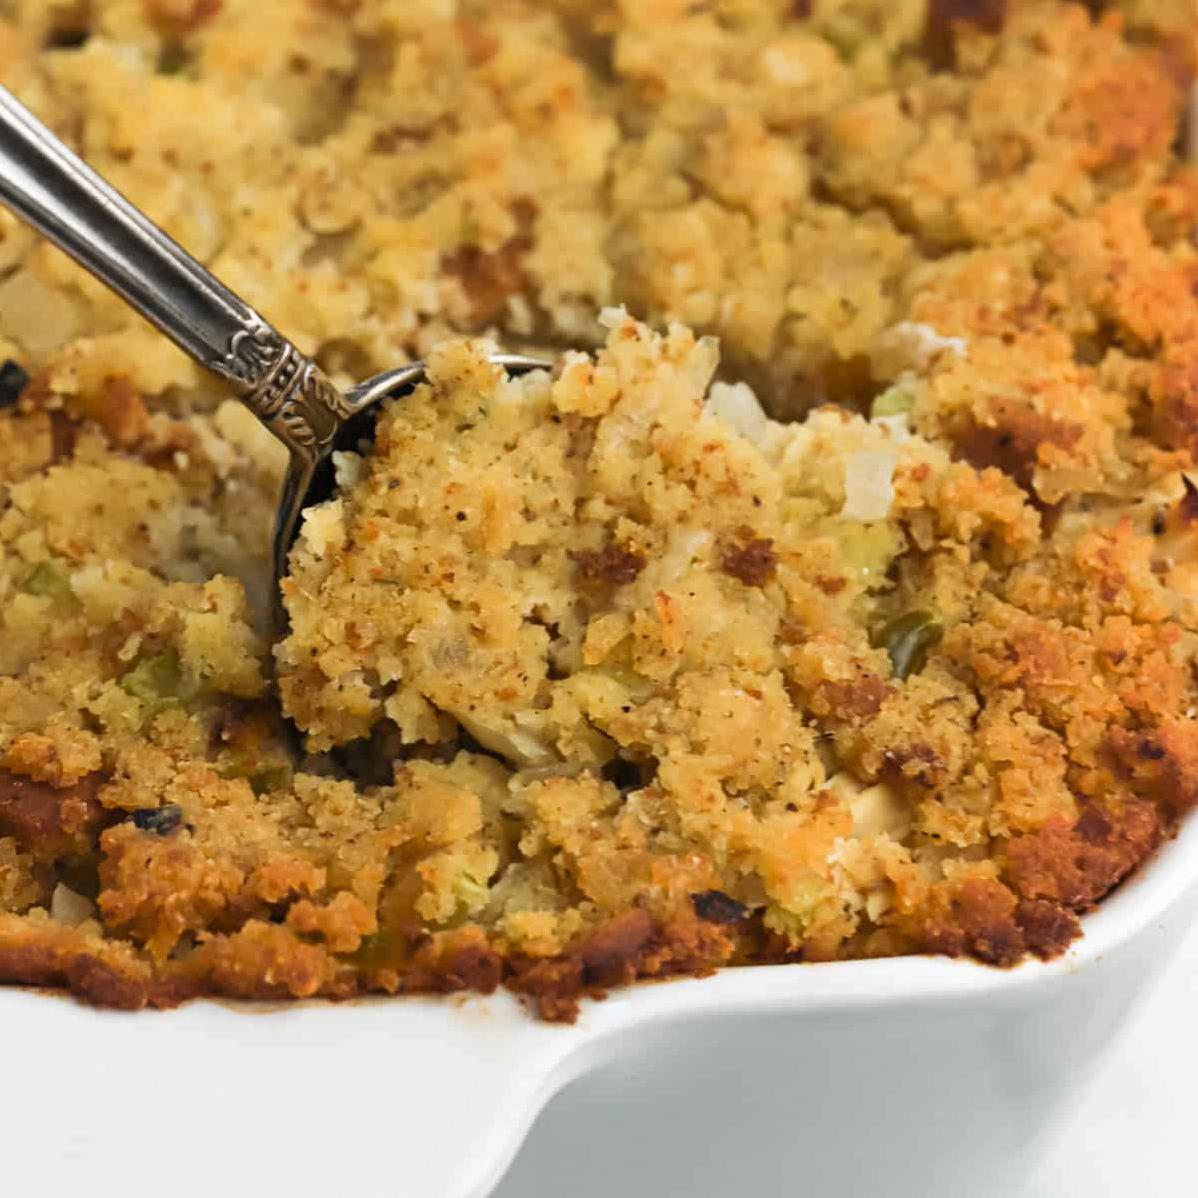  A Southern staple, cornbread dressing is a must-have dish for Thanksgiving or any holiday occasion.